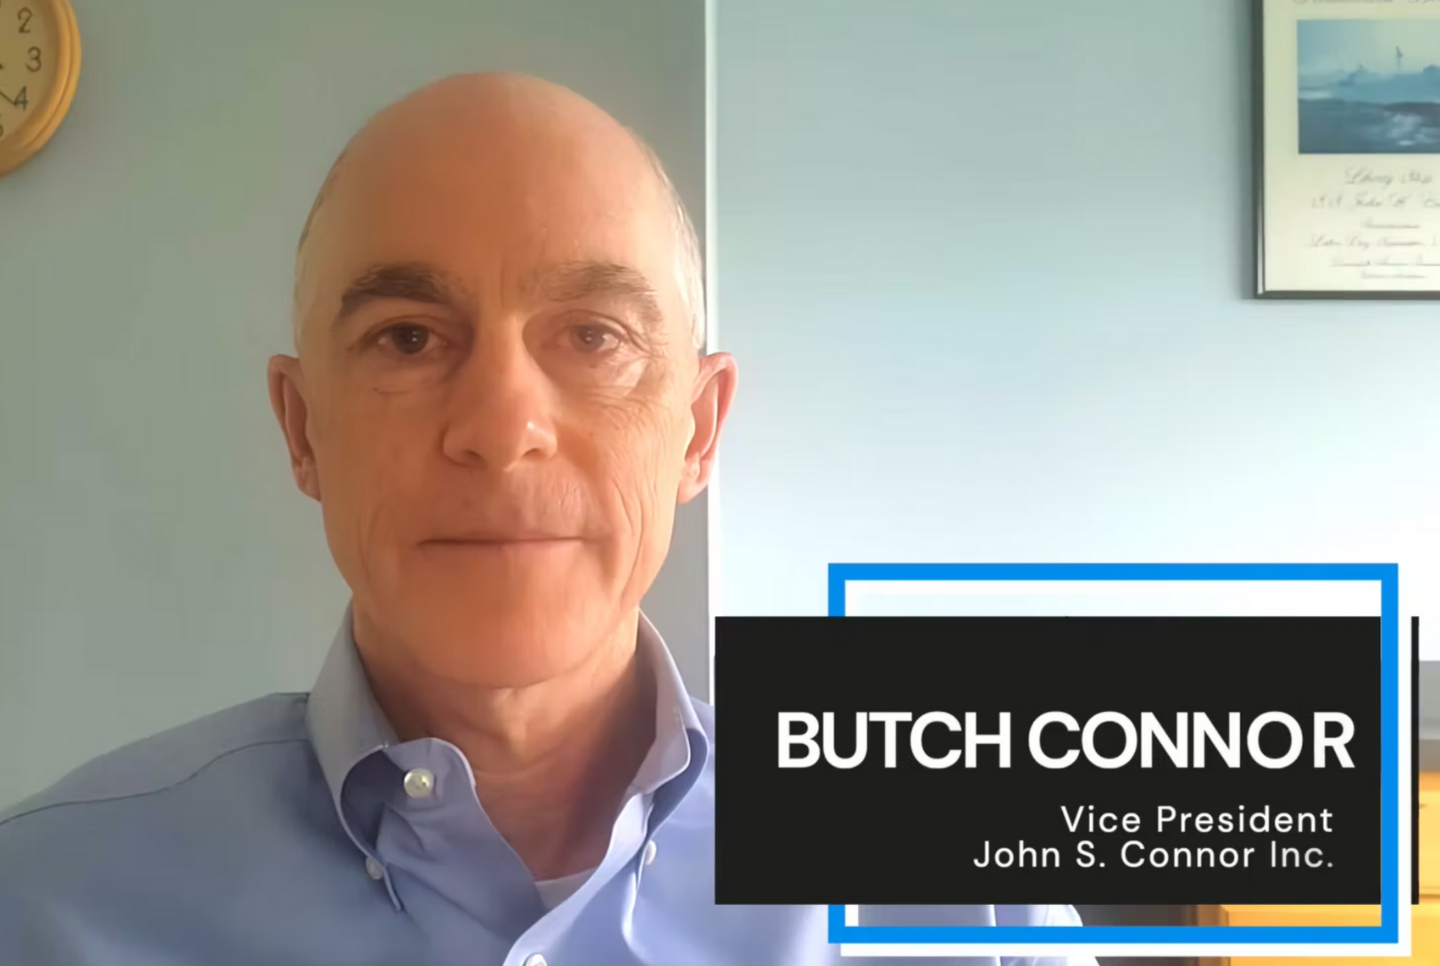 Learn why John S. Conner sees a strong future as a leading freight forwarder supported by Chain.io.